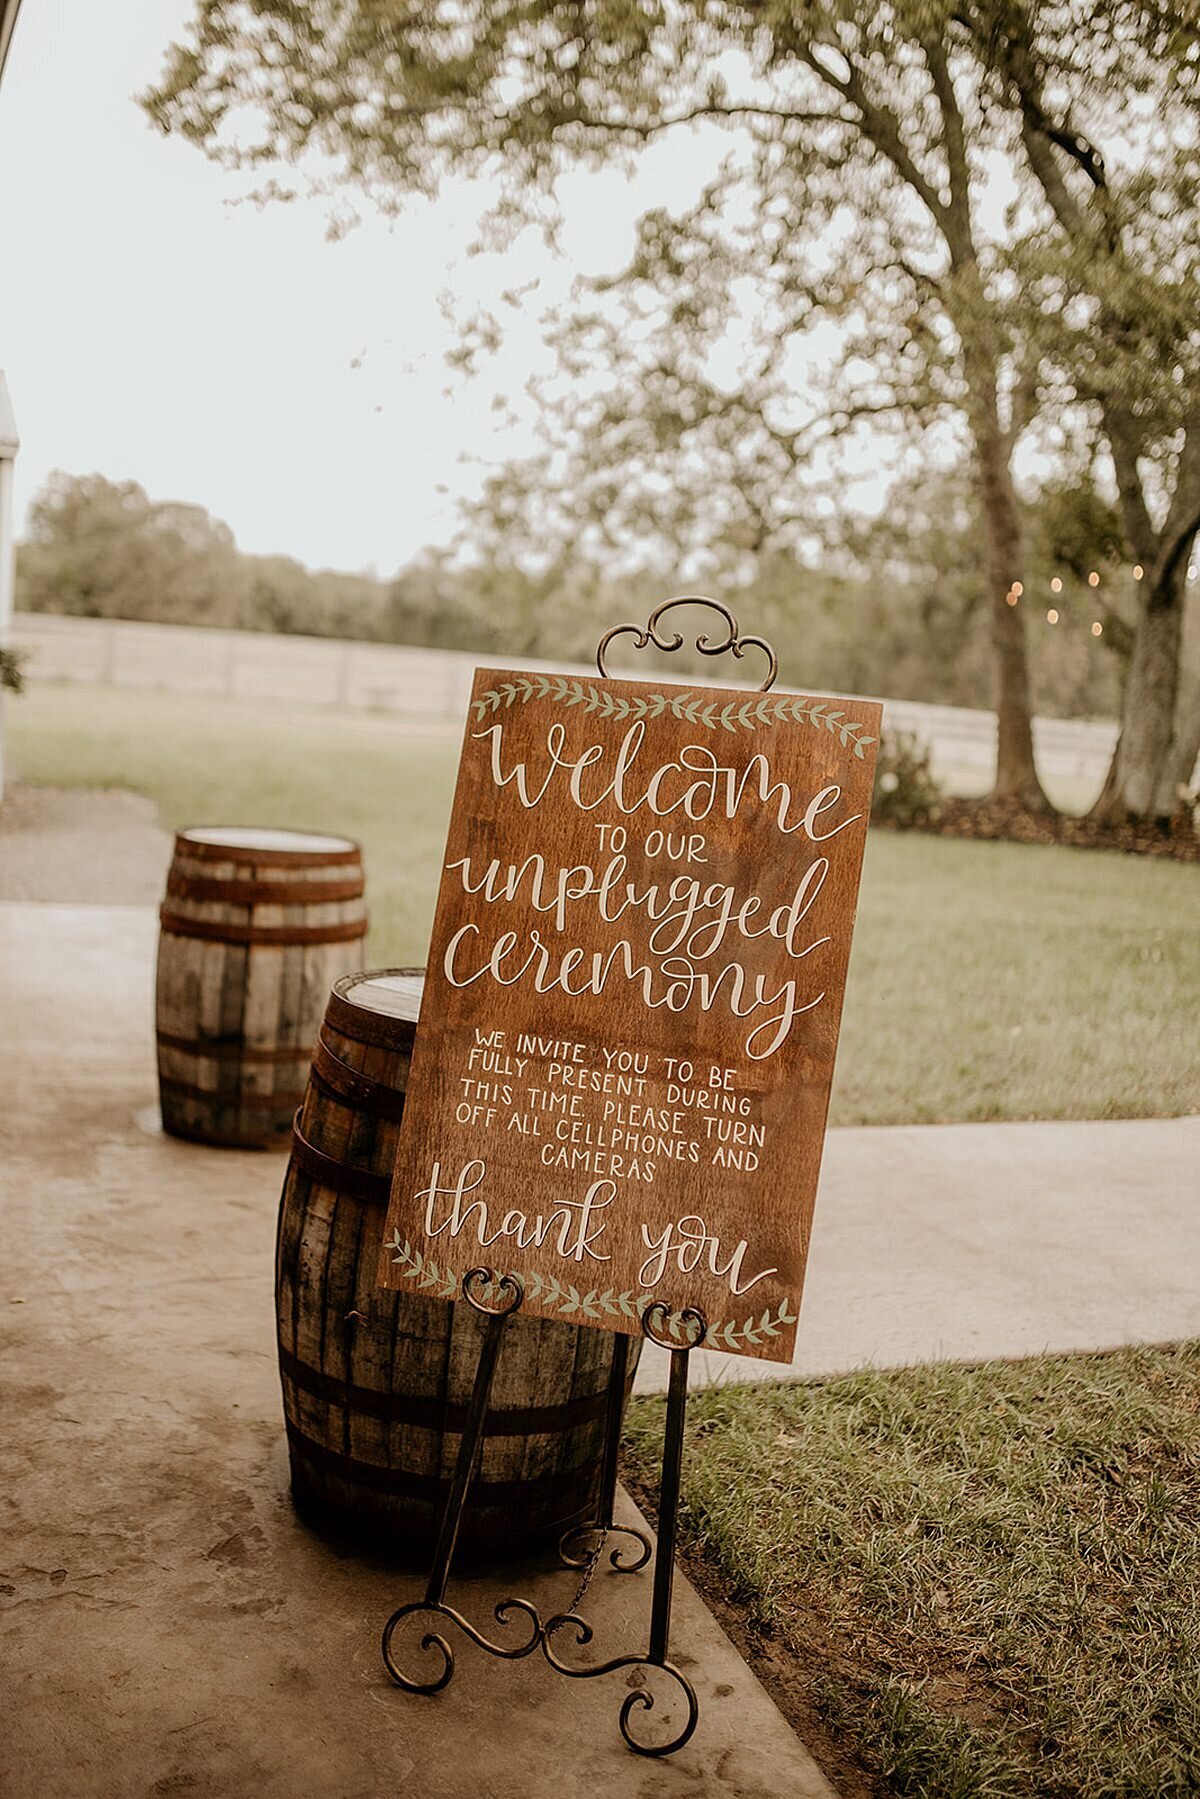 Wood wedding sign made by Lucky Shadow Shop details an unplugged wedding ceremony on a cast iron easel beside two wine barrels.